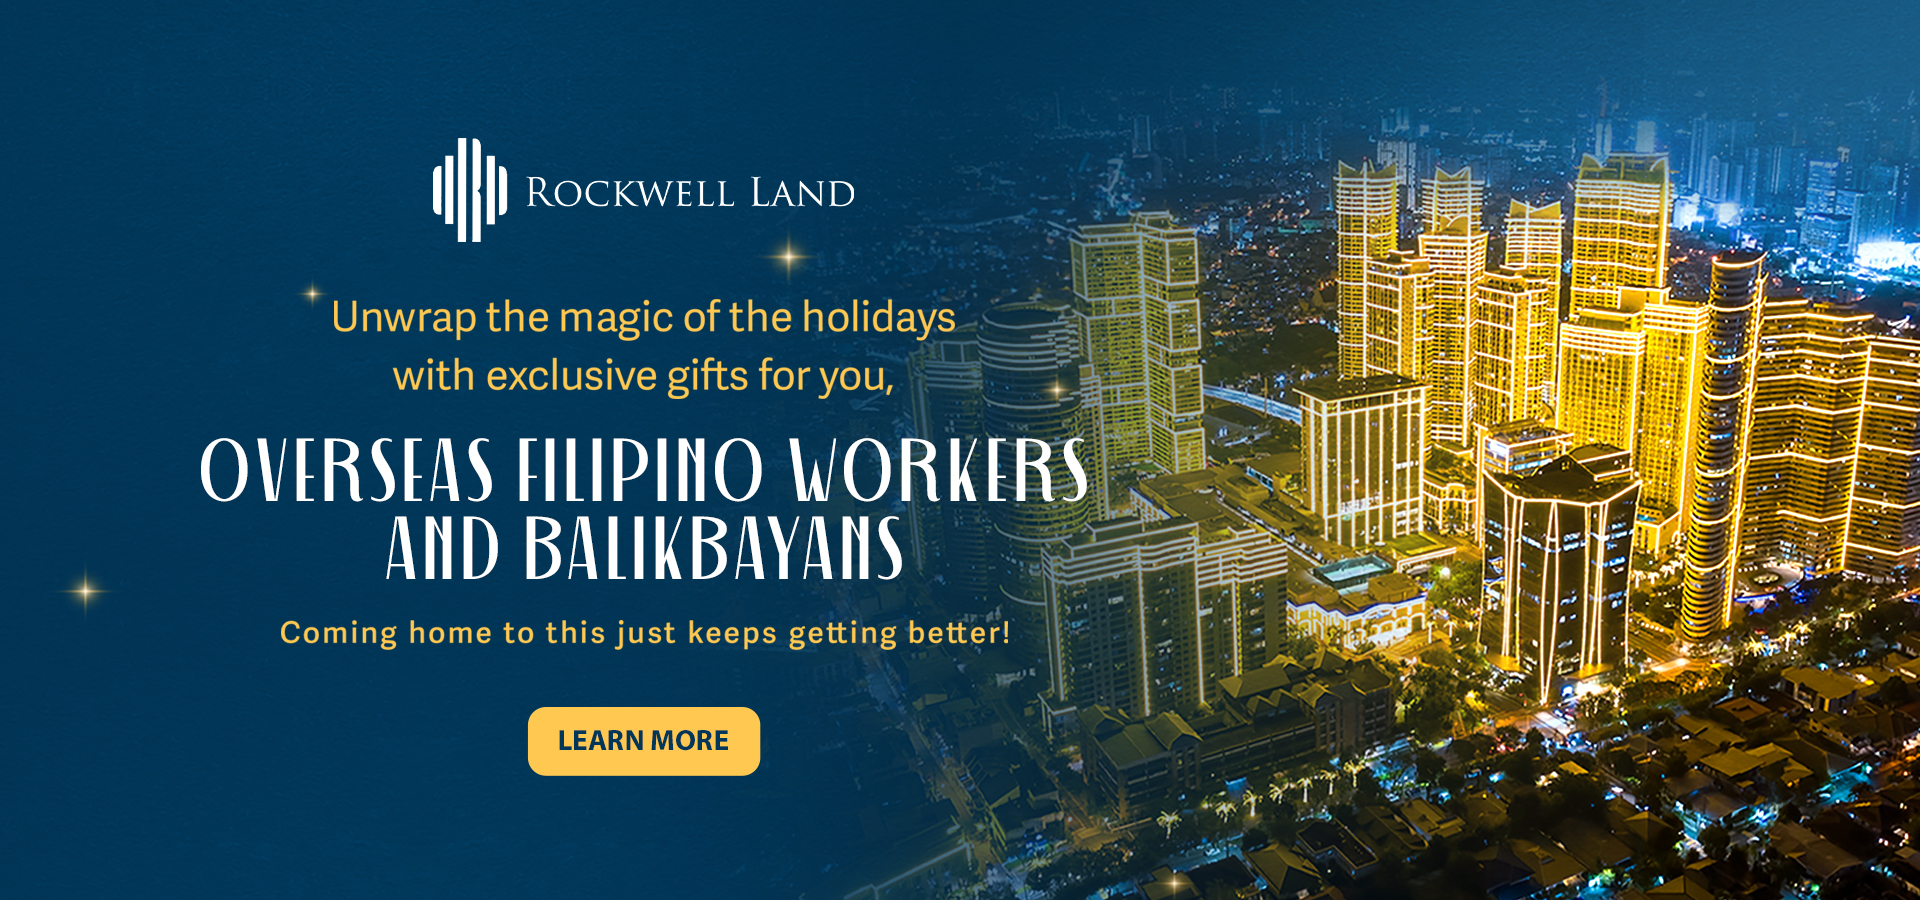 ofw-campaign